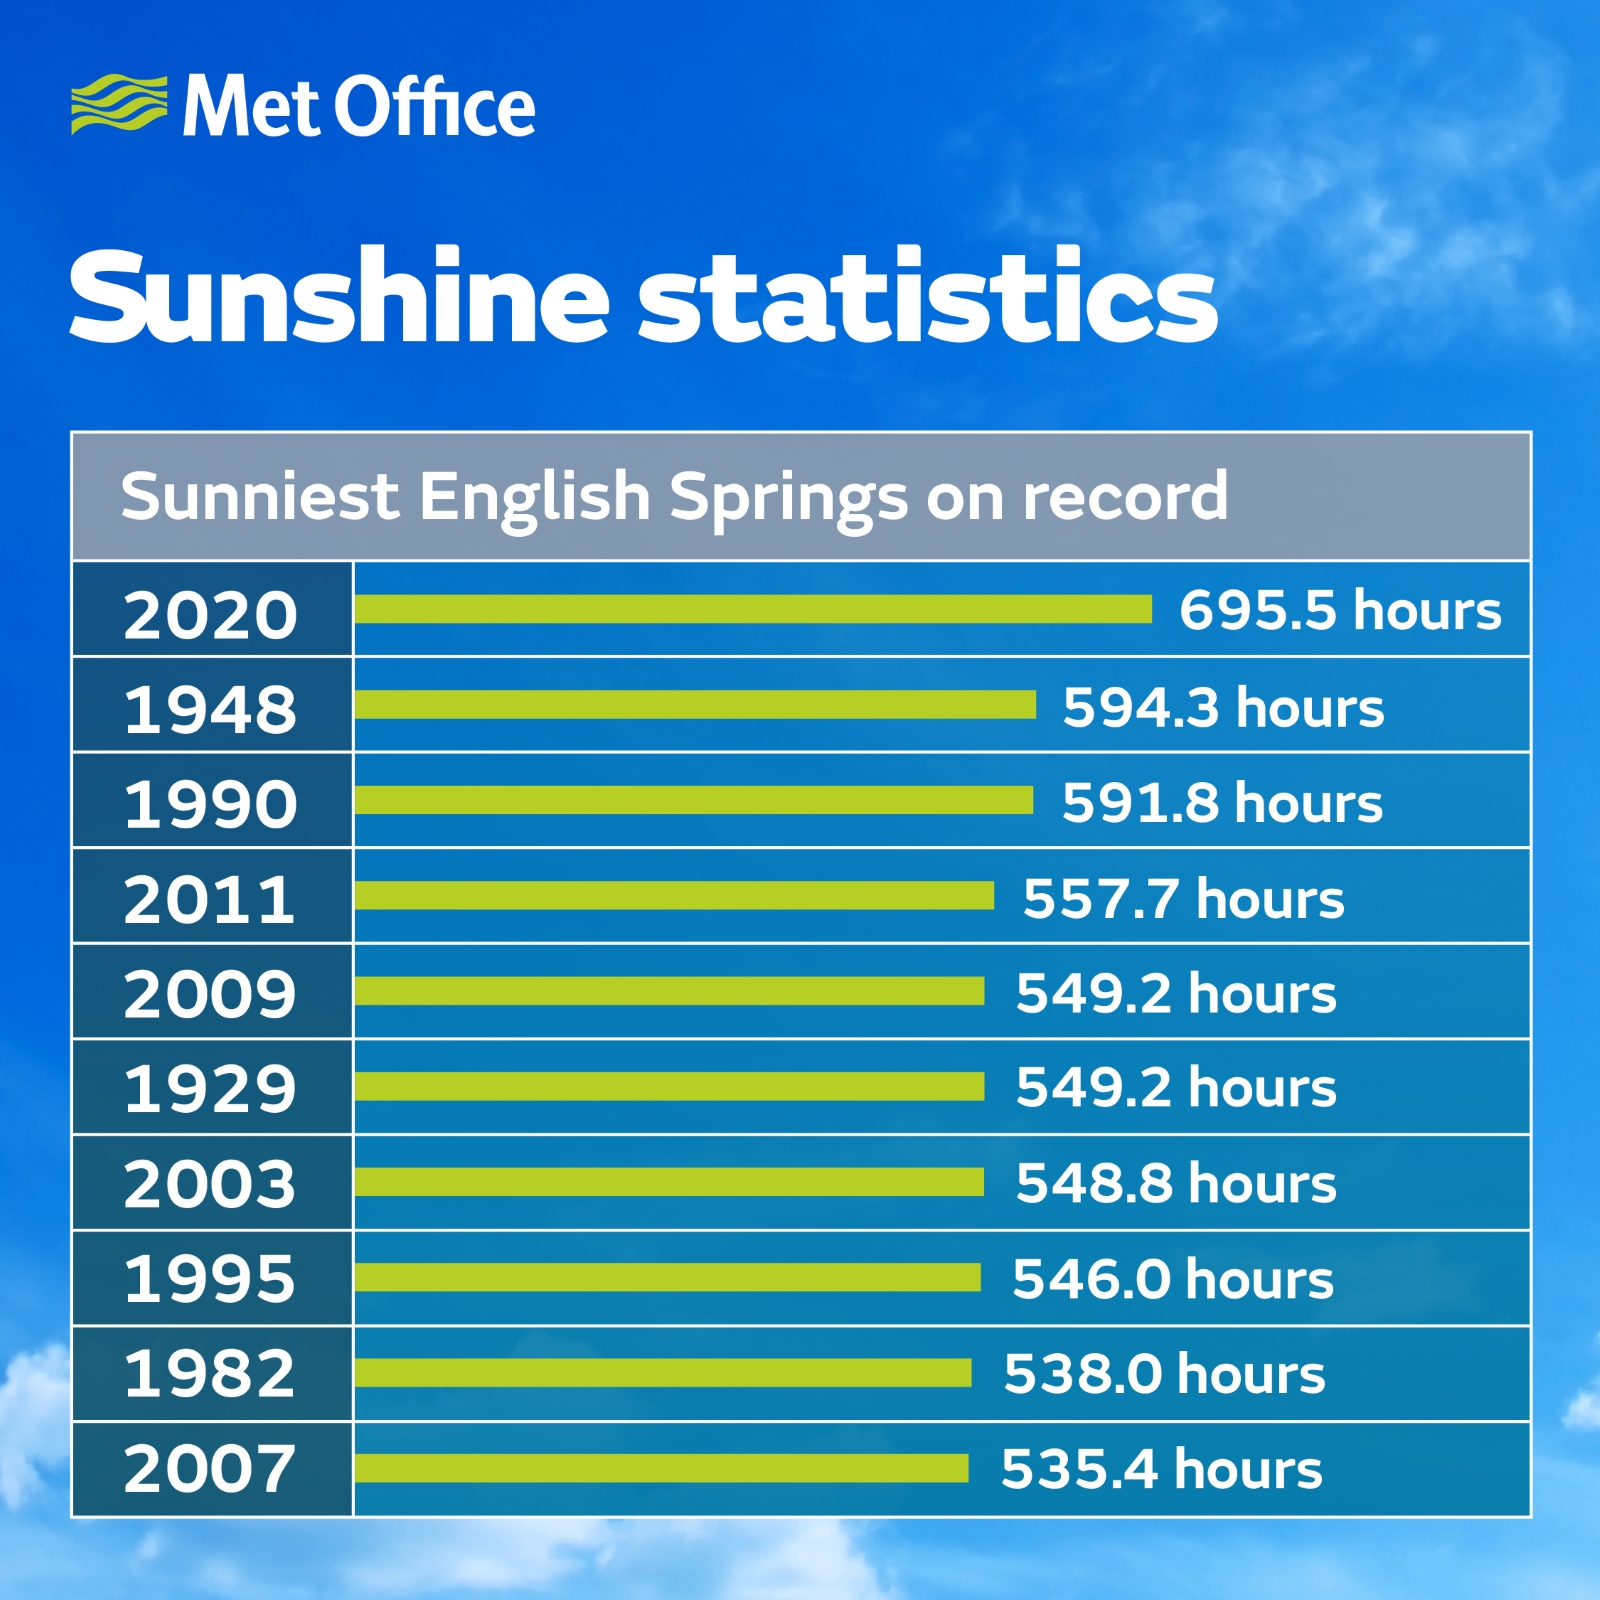 Sunniest English springs on record: 2020 (695.5 hours); 1948 (594.3 hours); 1990 (591.8 hours); 2011 (557.7 hours); 2009 (549.2 hours); 1929 (549.2 hours); 2003 (548.8 hours); 1995 (546 hours); 1982 (538 hours); and 2007 (535.4 hours).